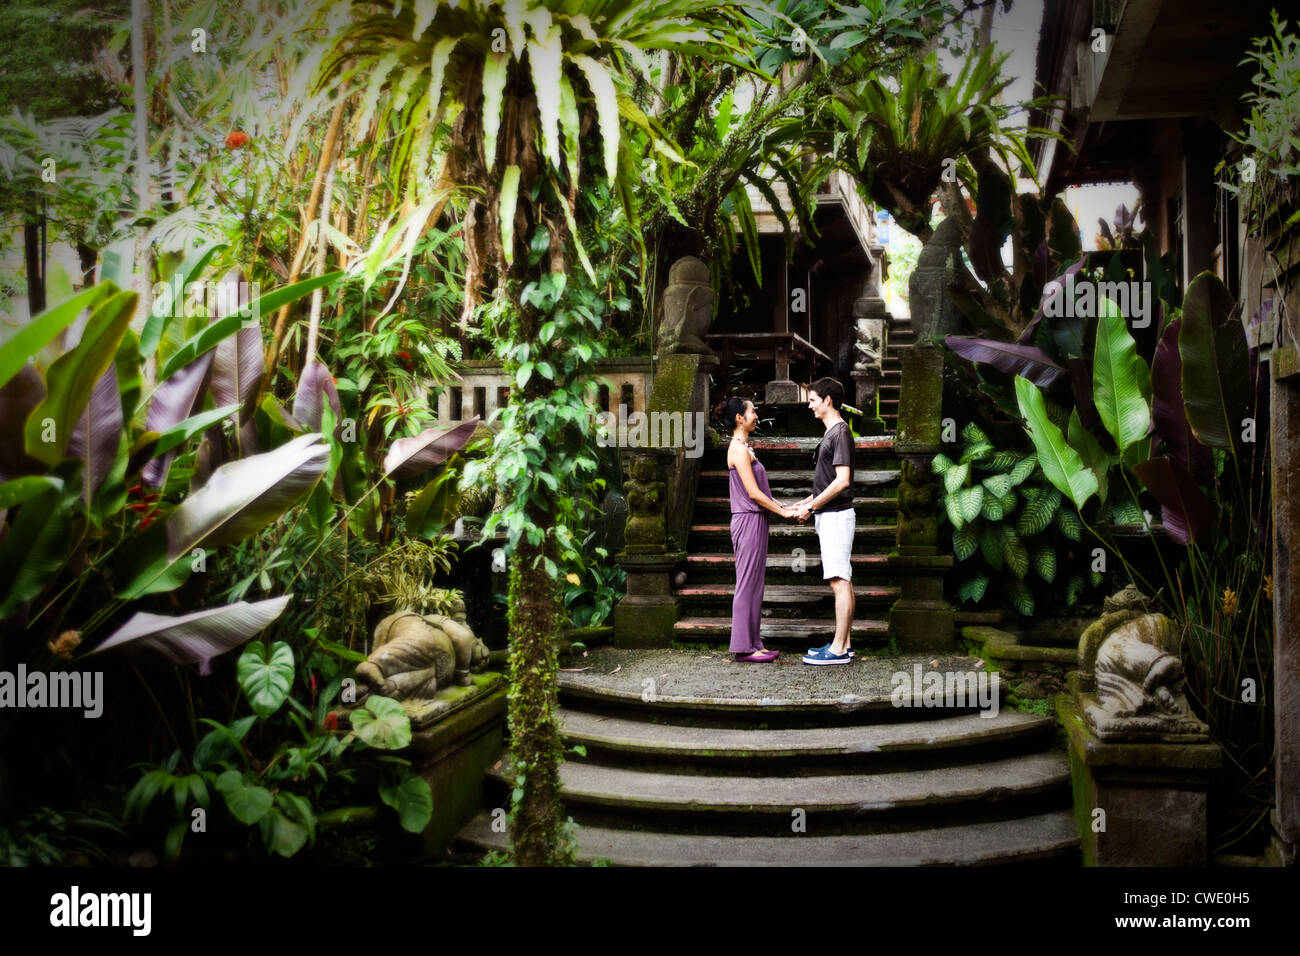 A happy married couple holding hands in a lush jungle setting in Bali, Indonesia. Stock Photo